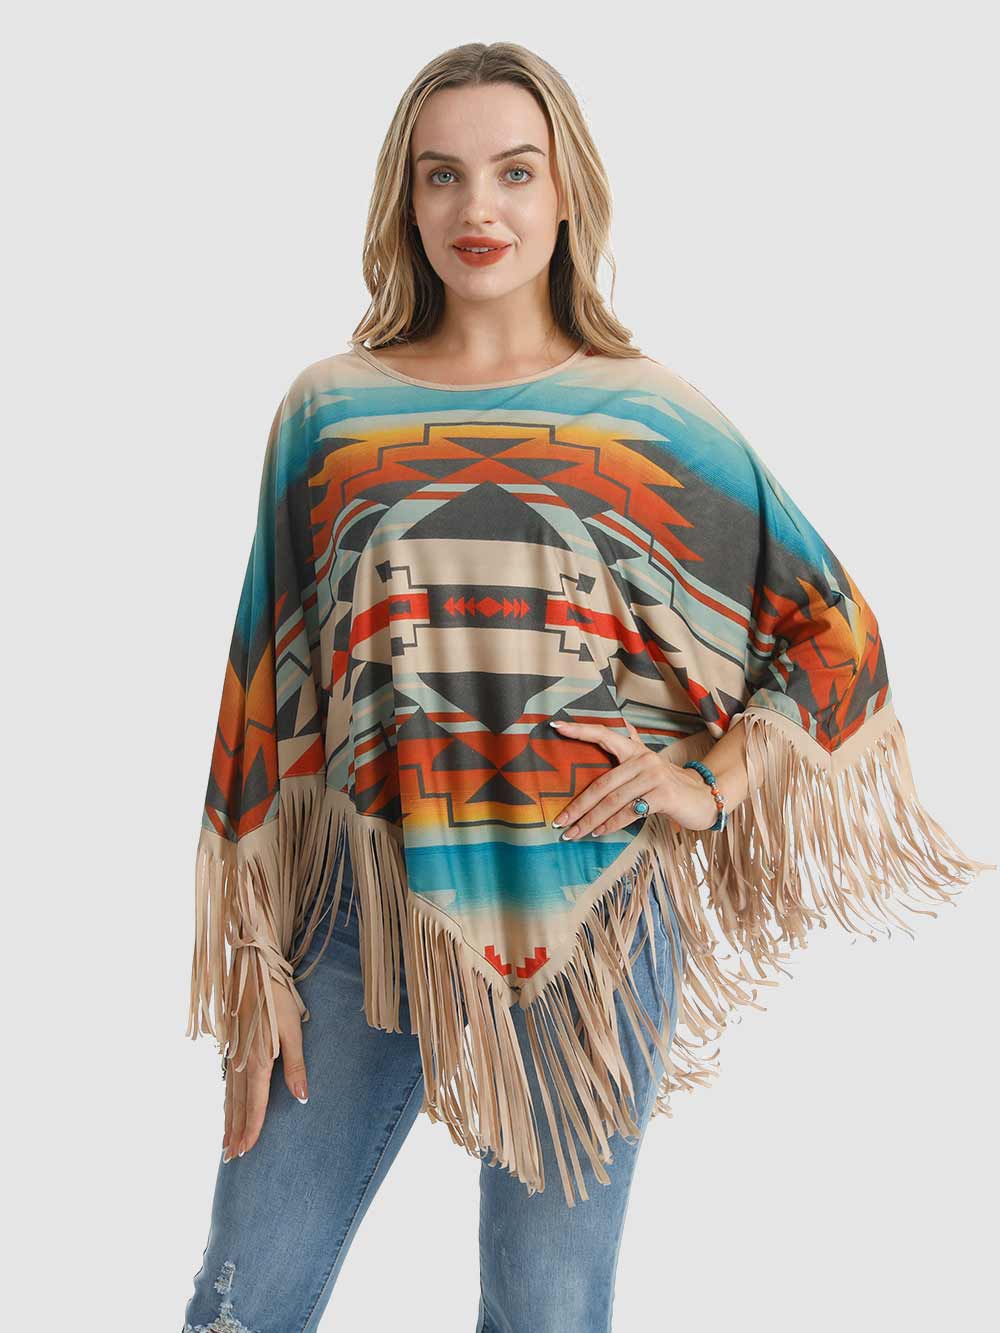 Montana West Aztec Collection Poncho - Montana West World